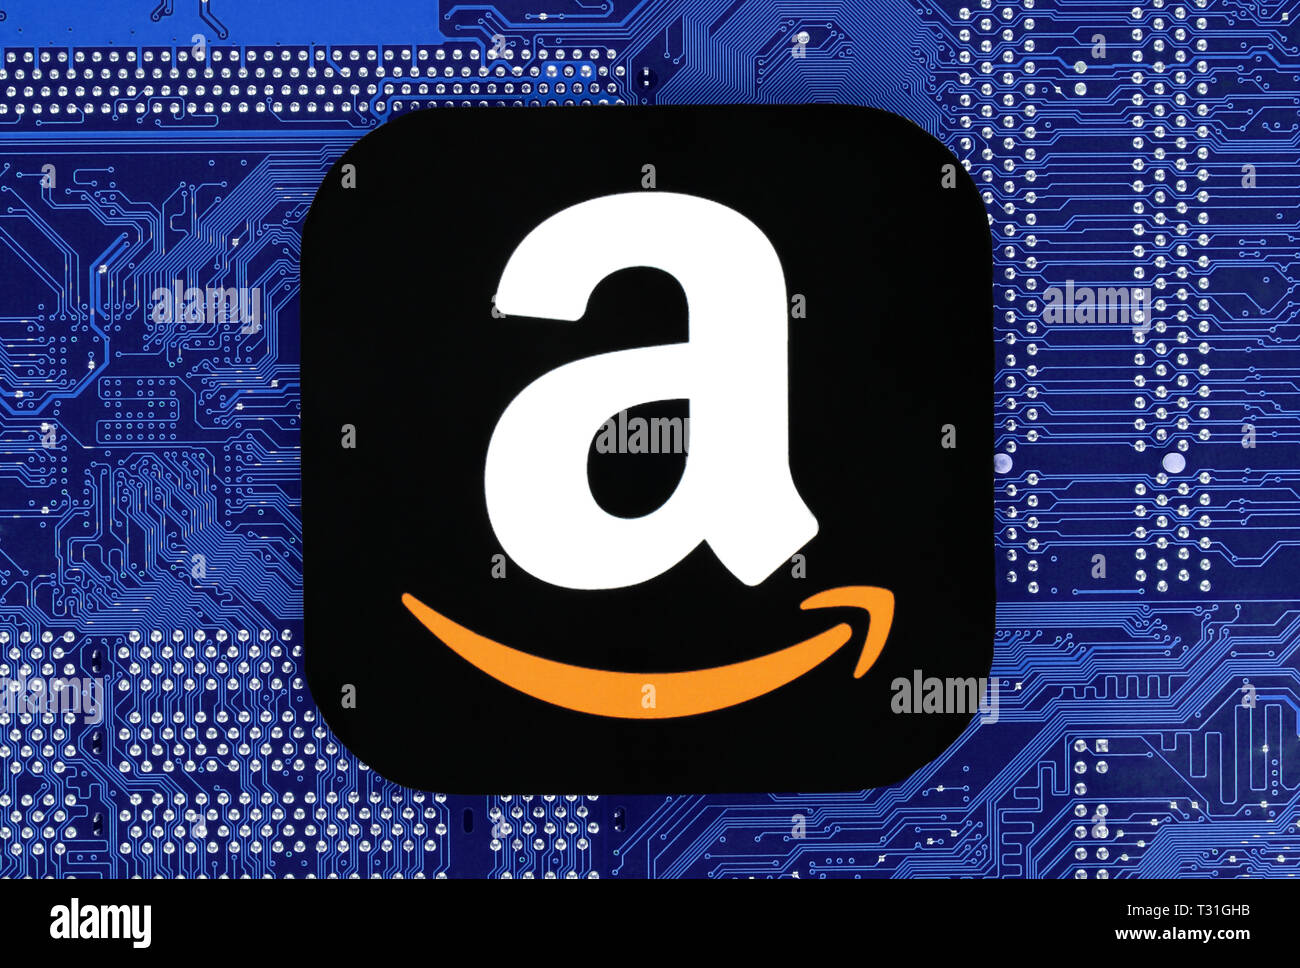 Kiev, Ukraine - February 12, 2019: Amazon icon printed on paper and placed on circuit board Stock Photo